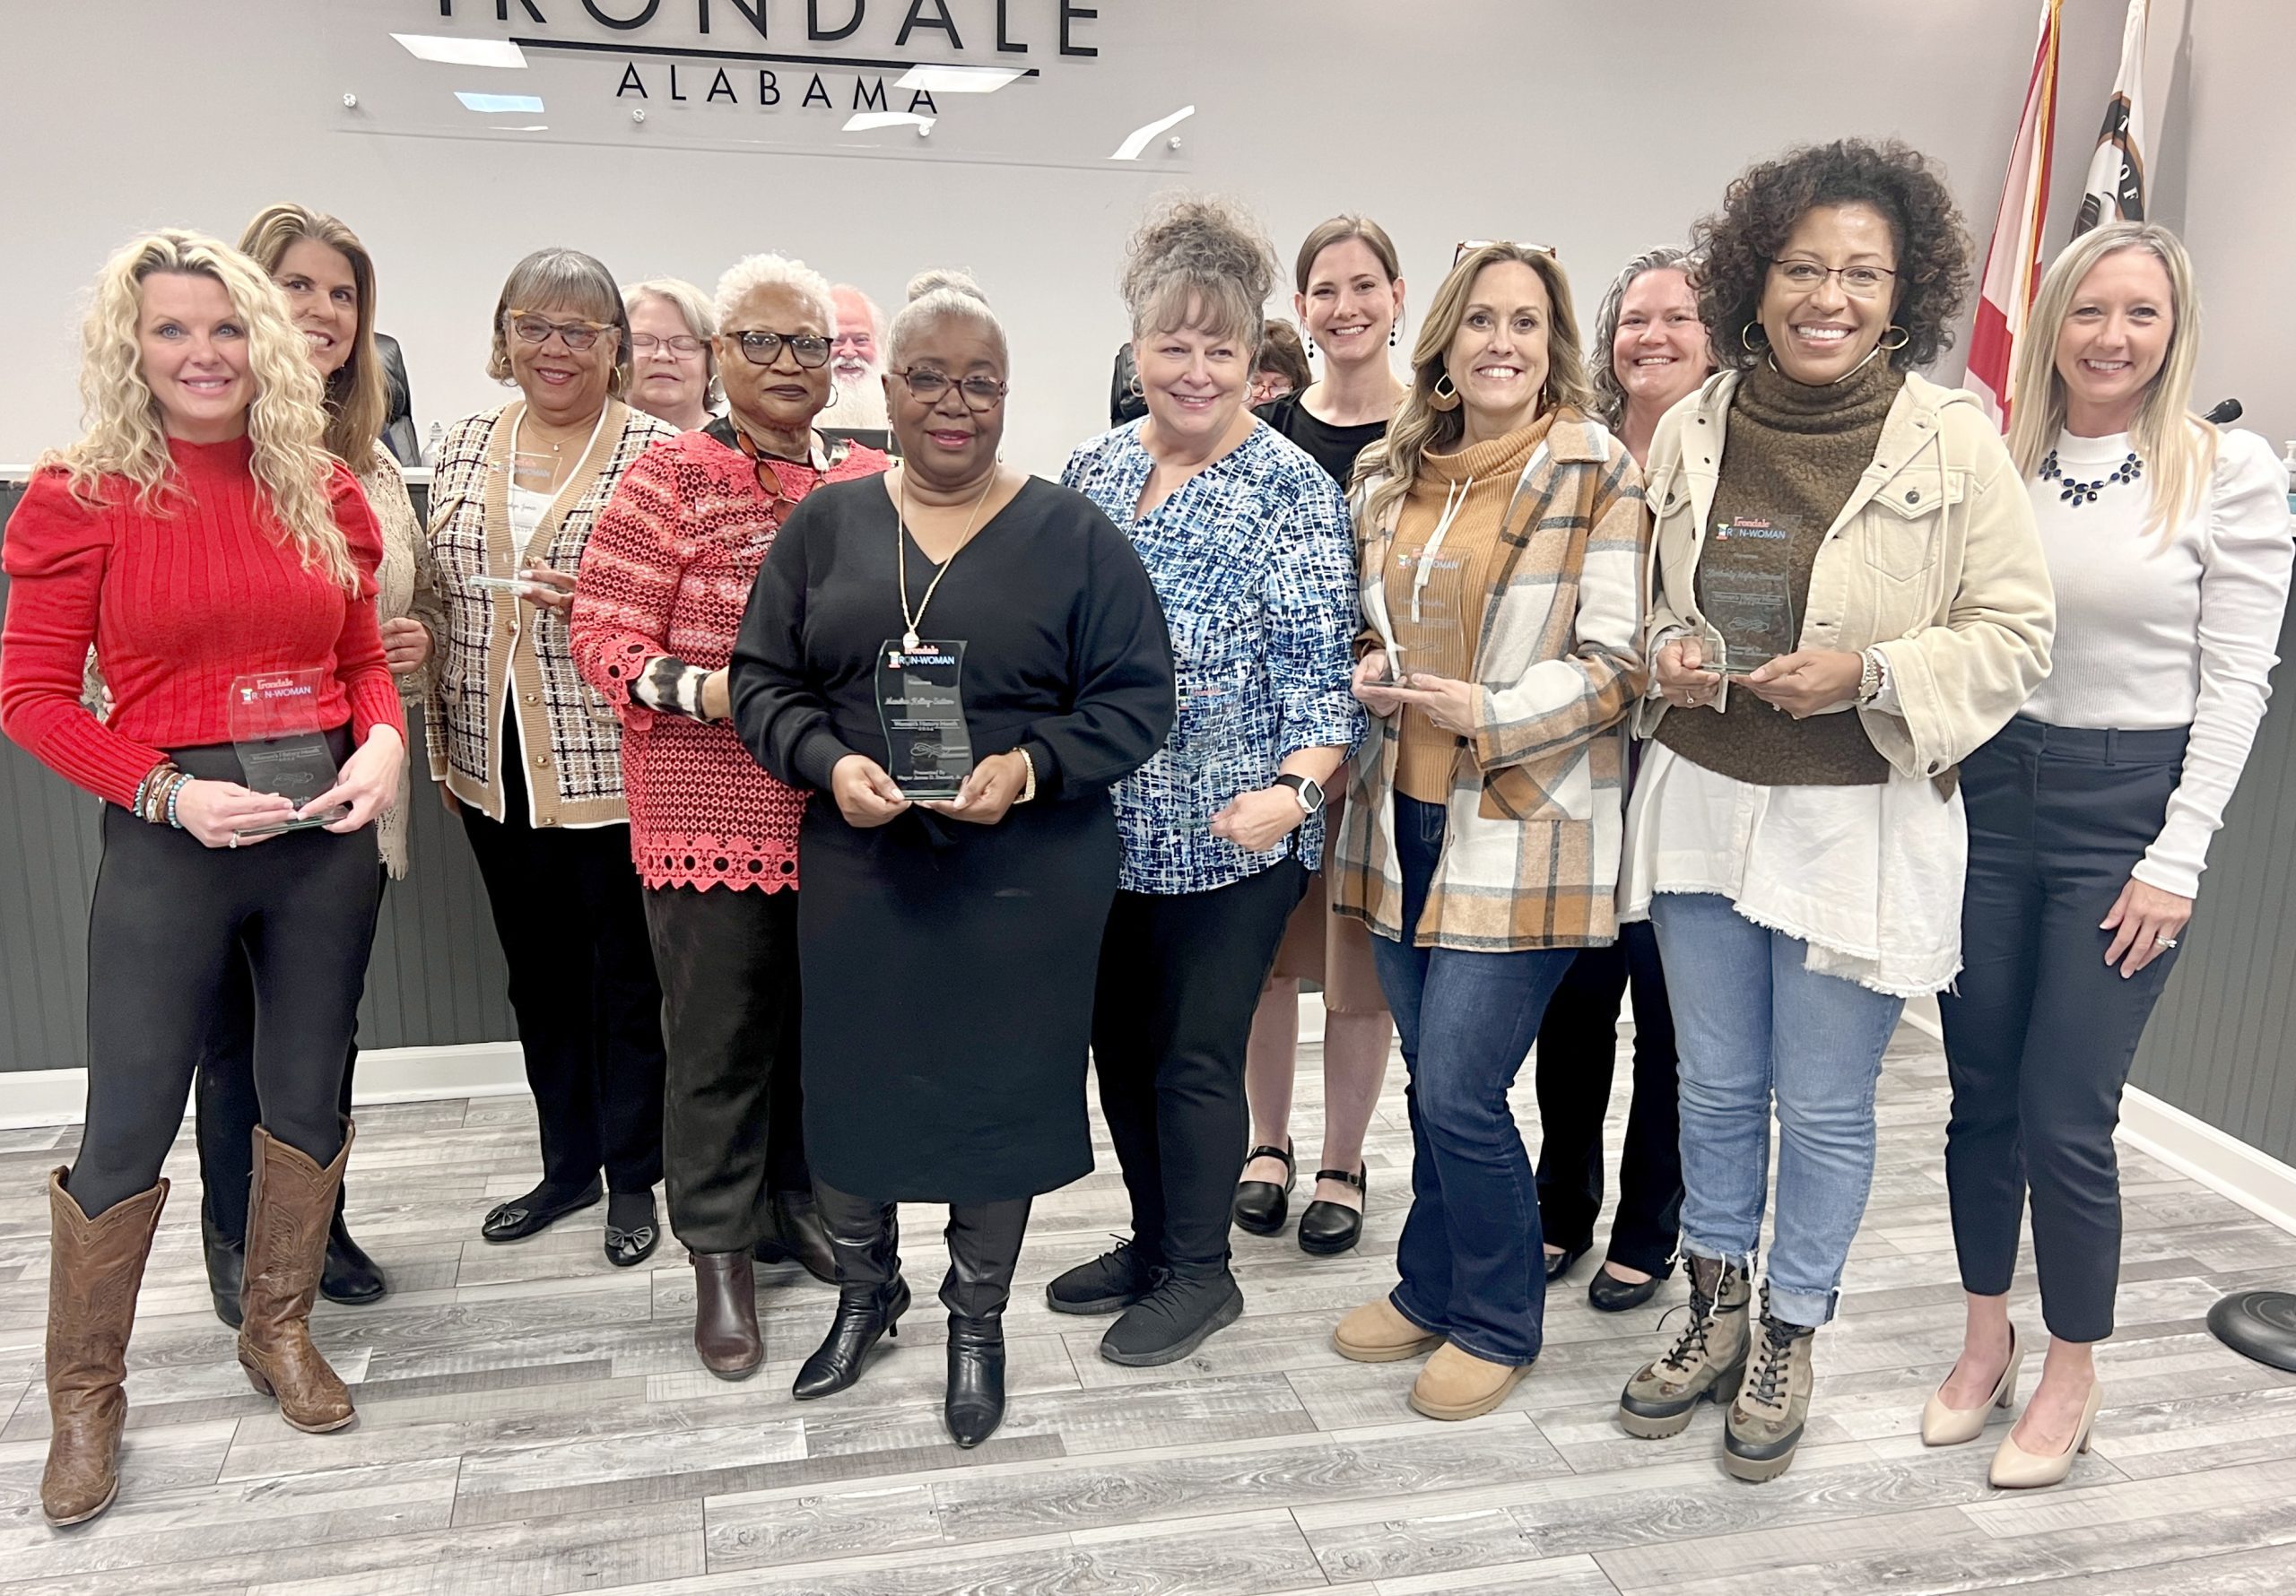 Irondale honors “Iron Women” of Irondale for Women's History Month